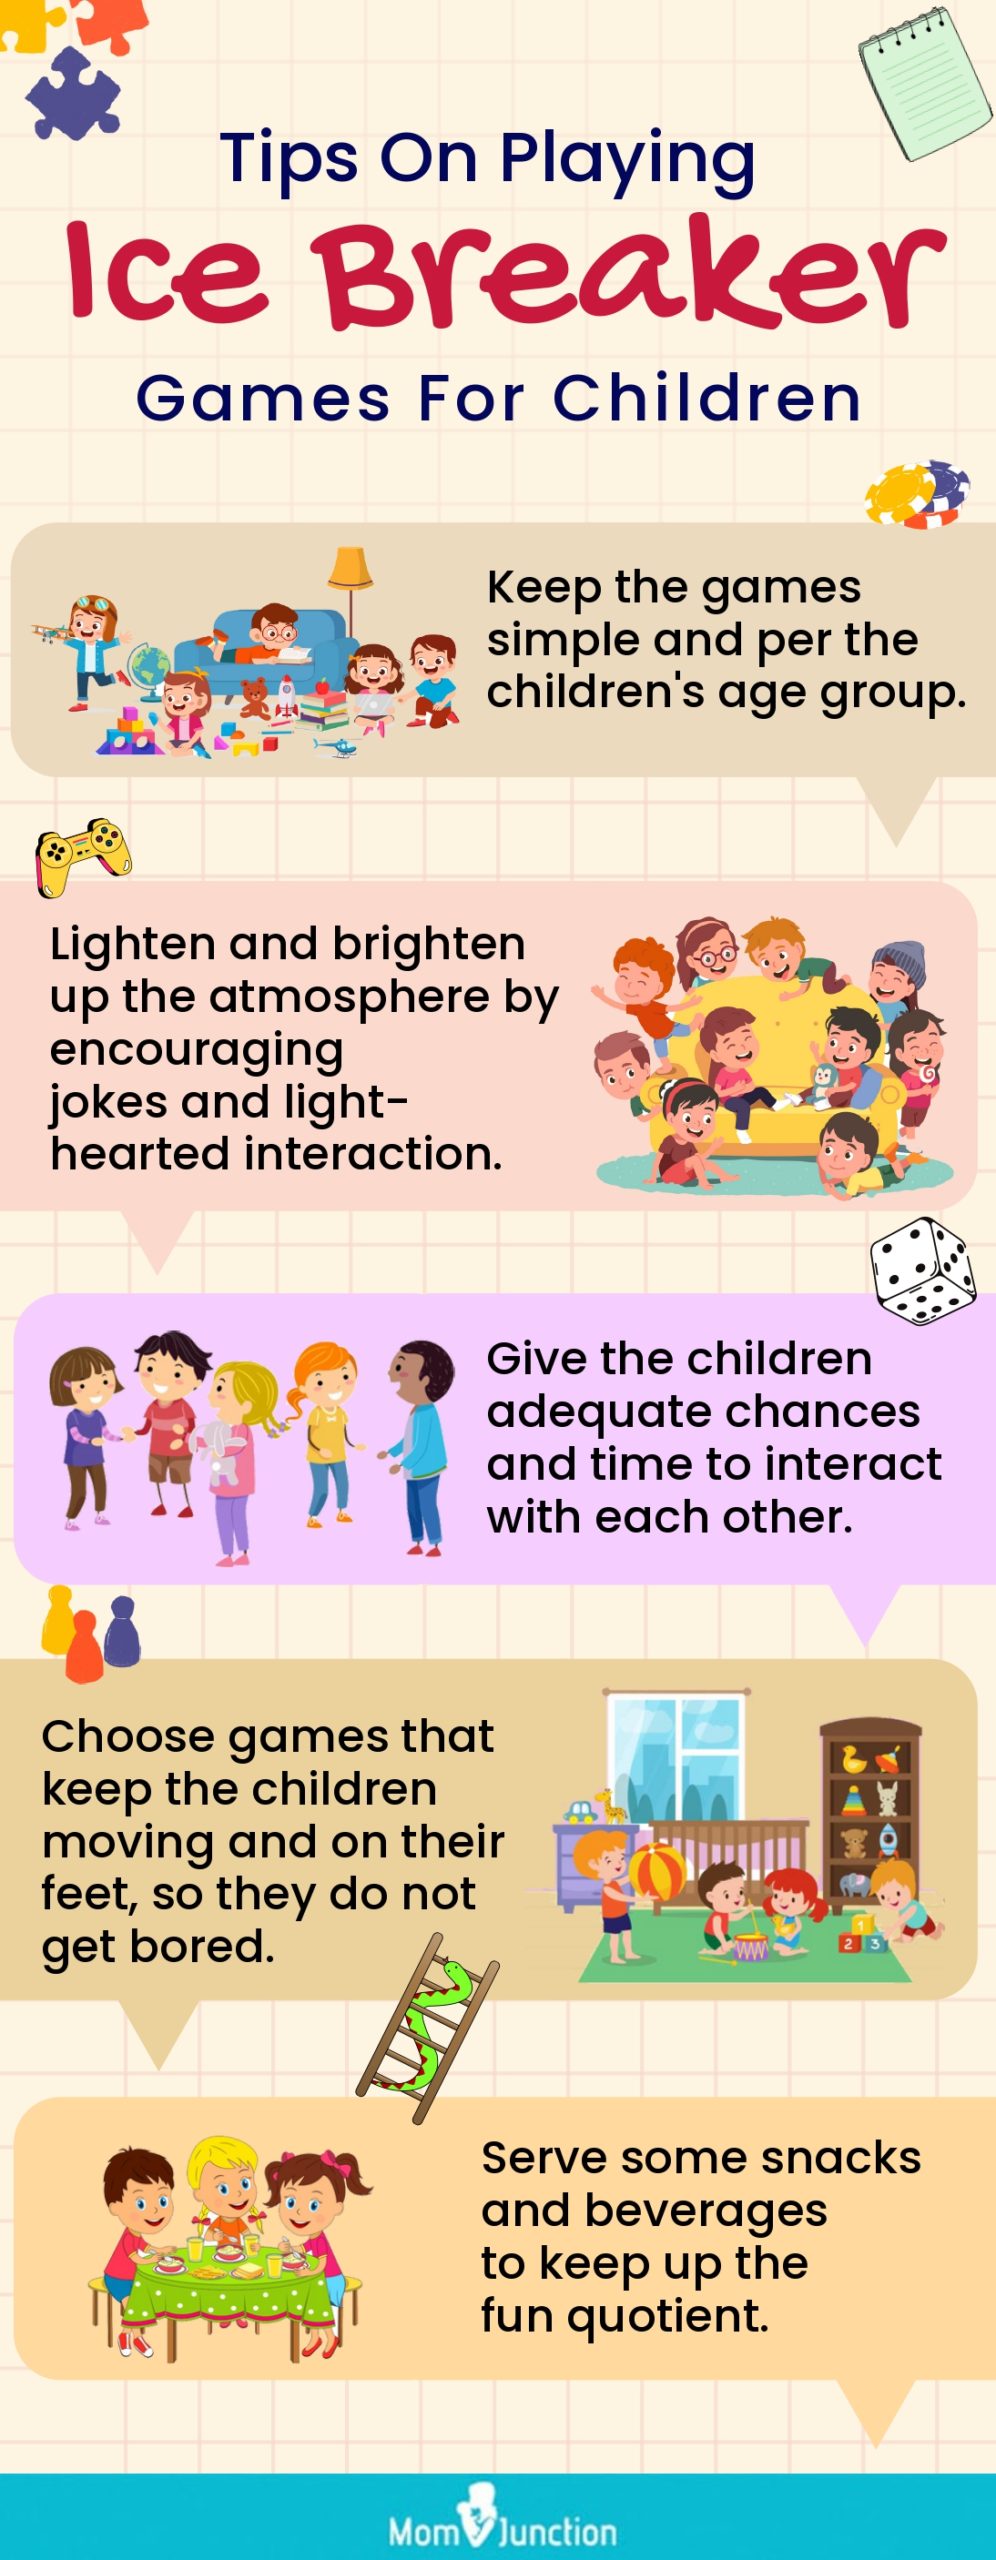 tips on playing ice breaker games for children (infographic)